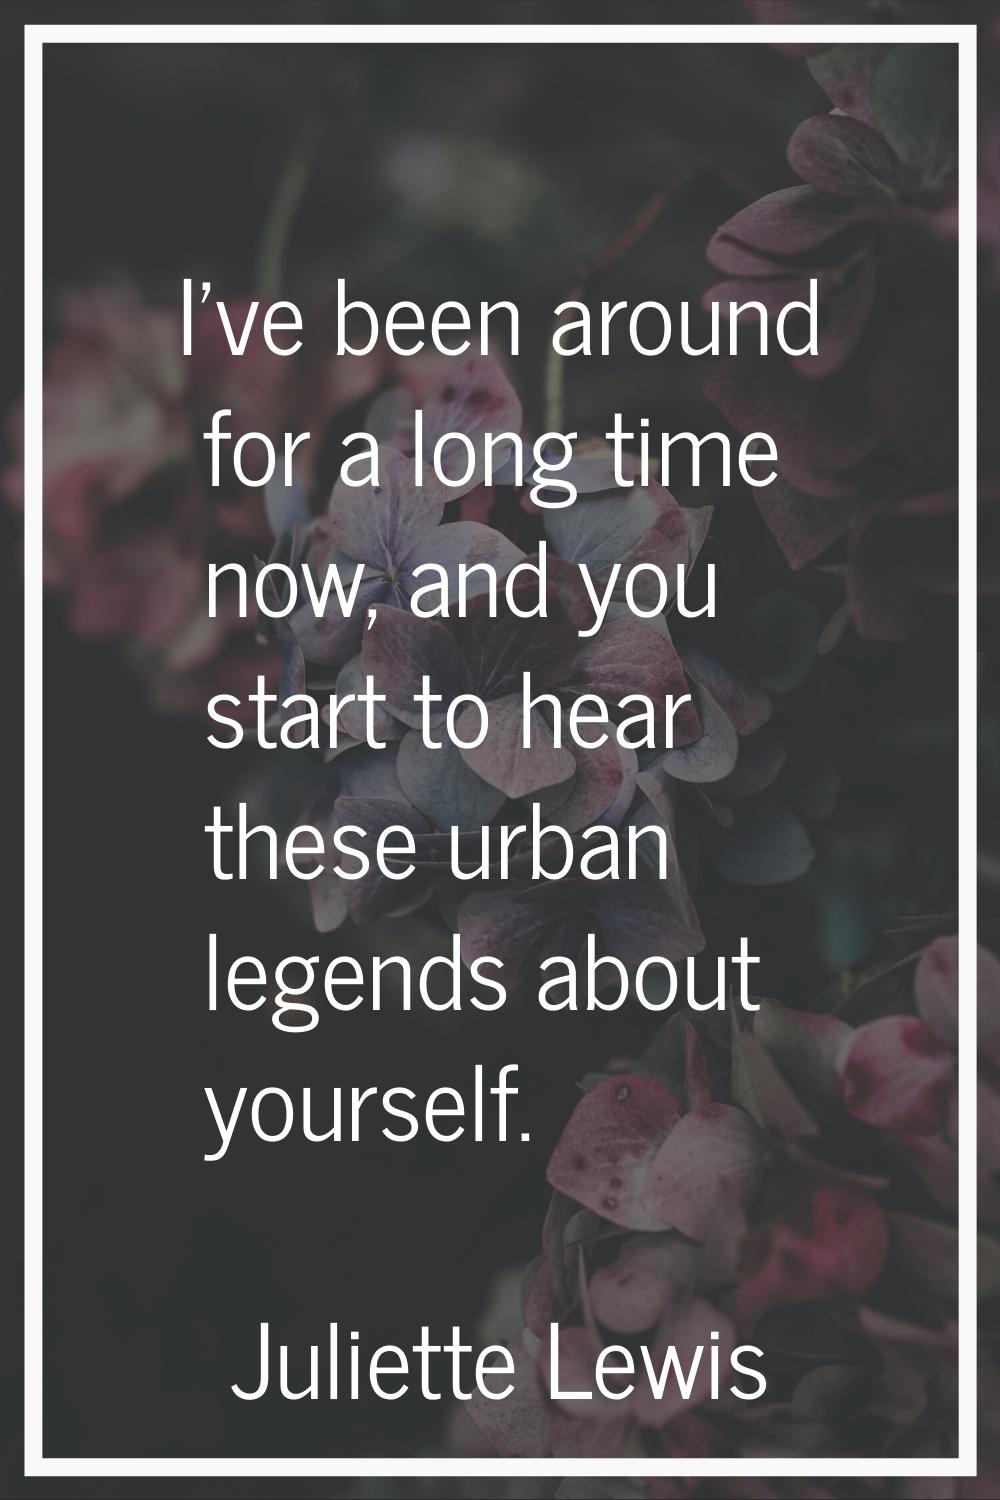 I've been around for a long time now, and you start to hear these urban legends about yourself.